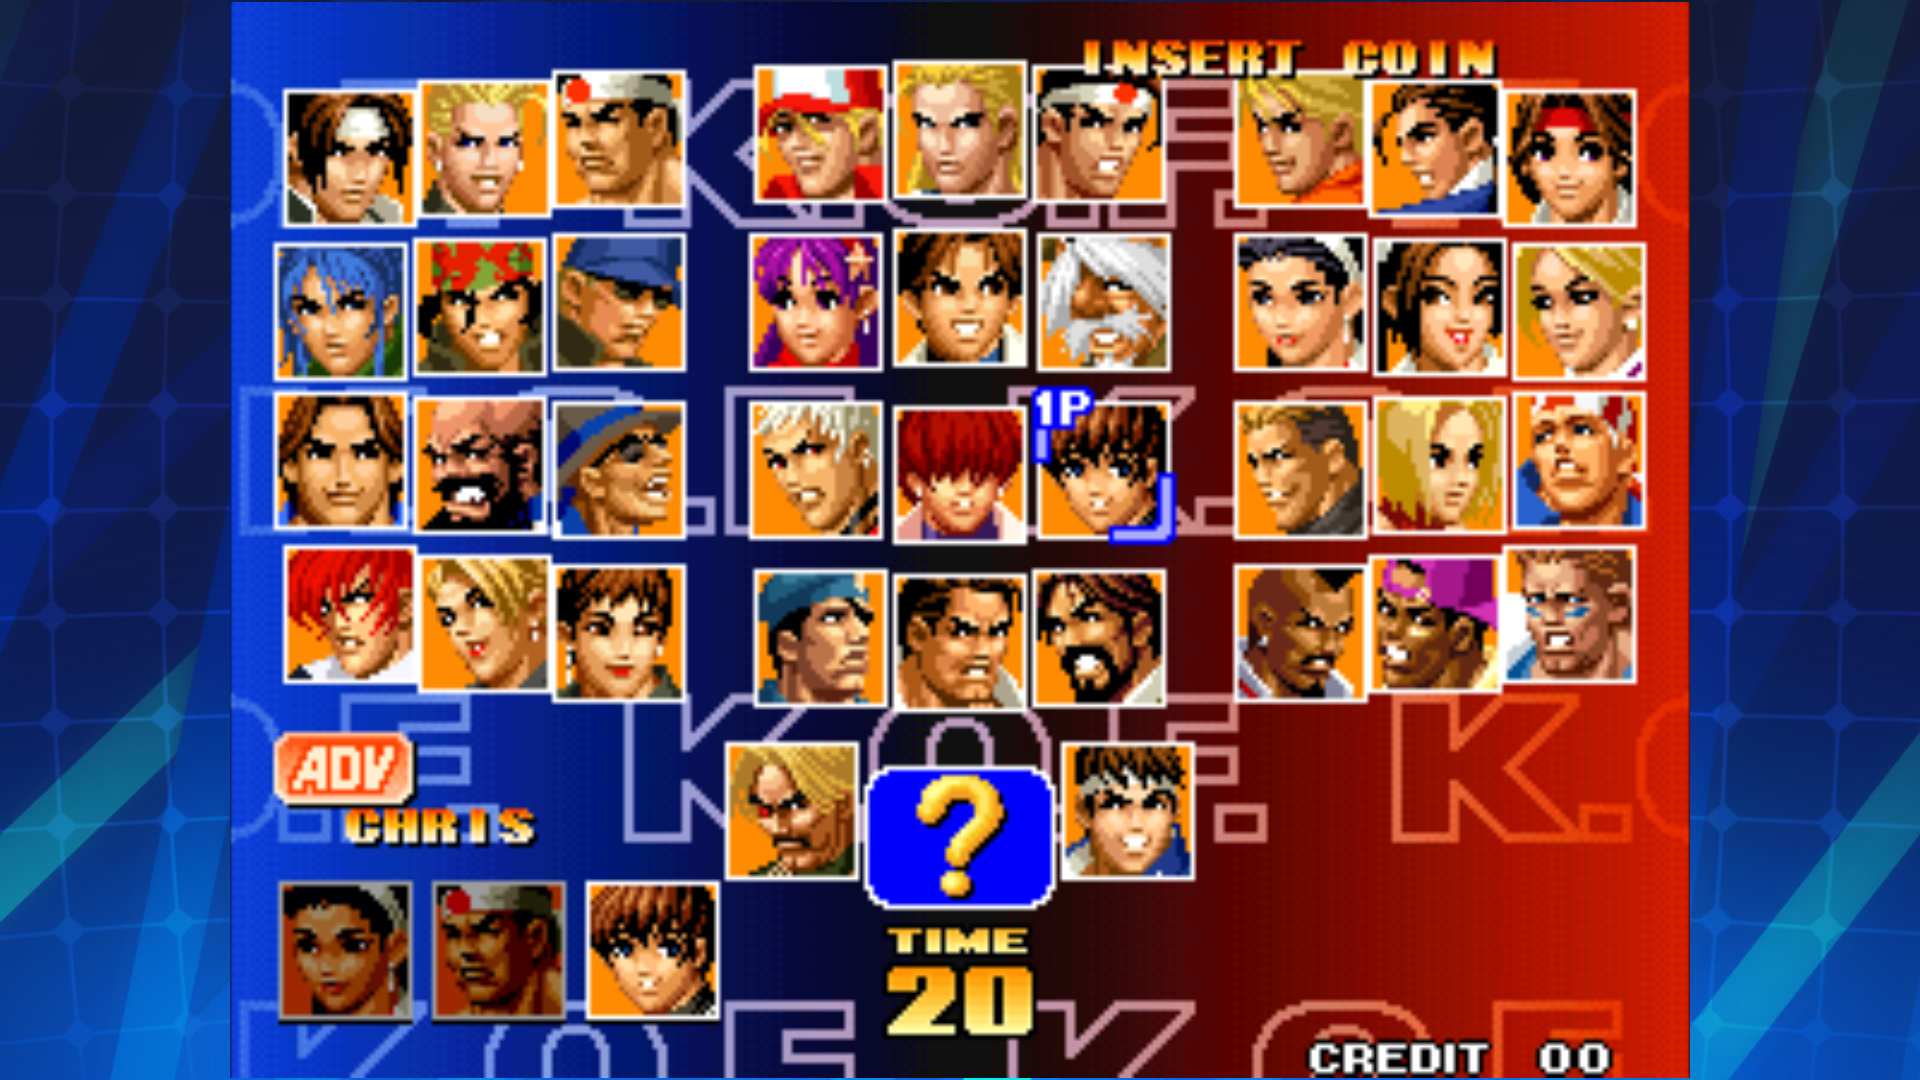 King of Fighter 98 APK - Free download for Android